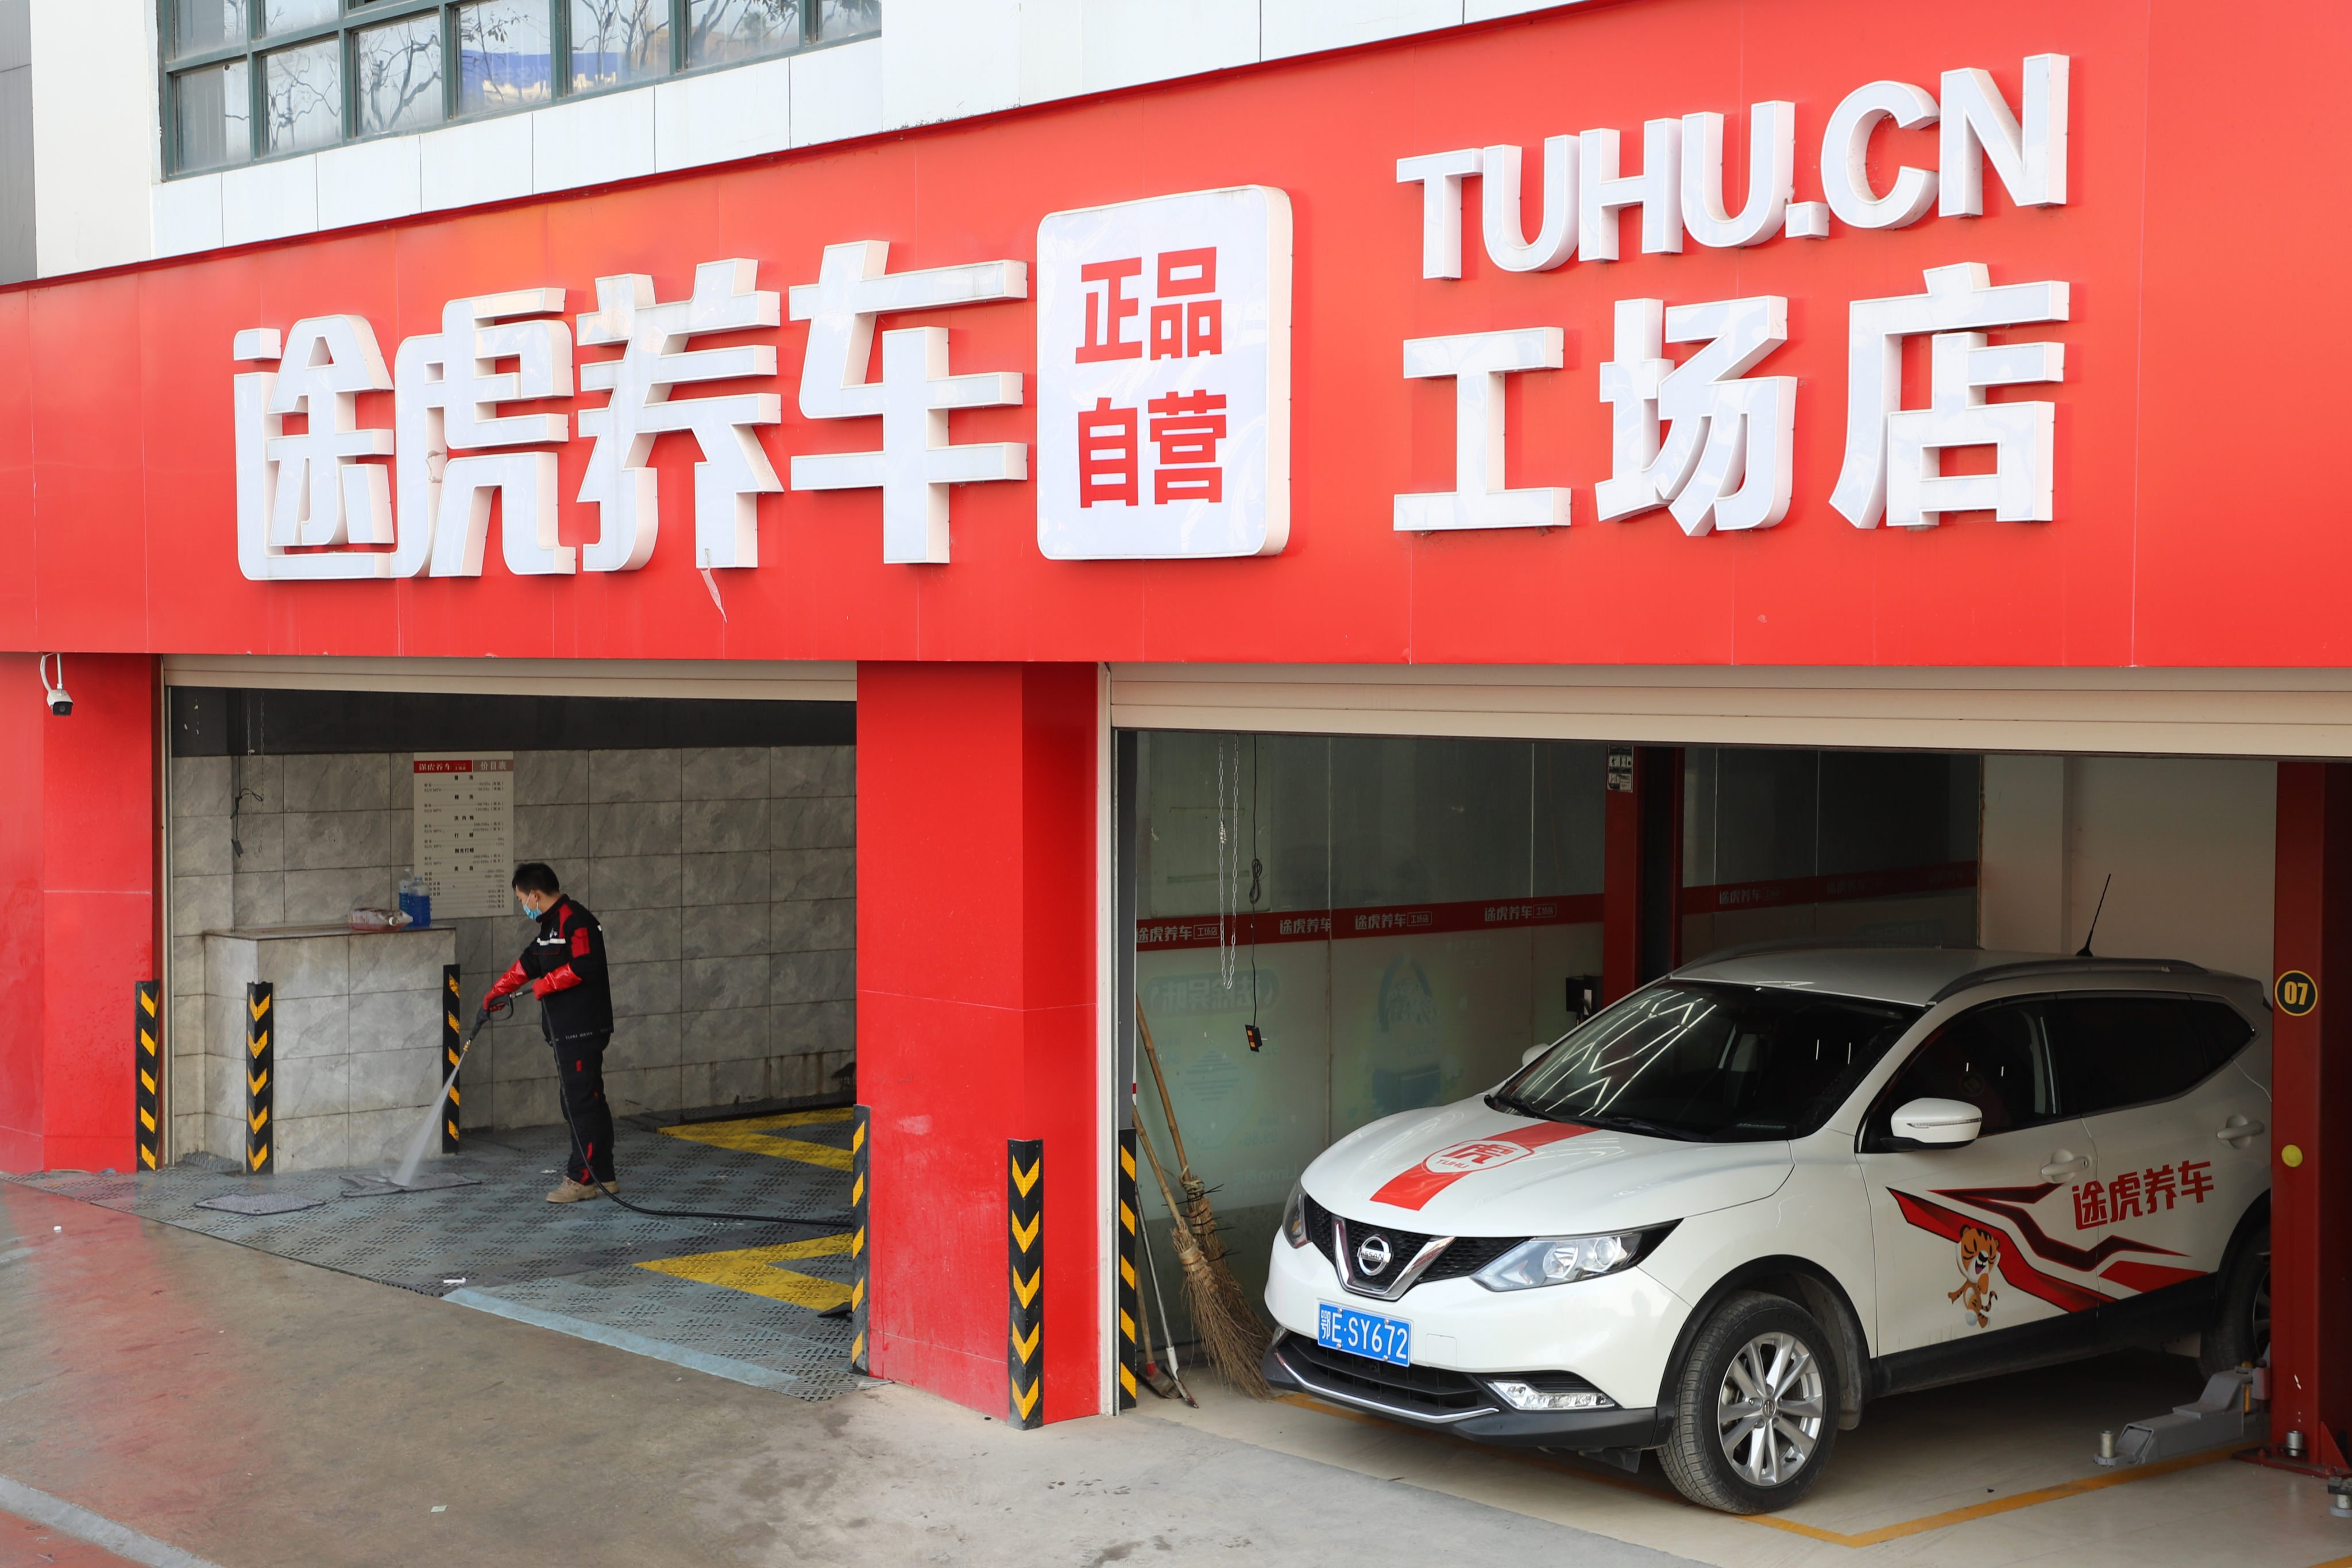 Tuhu said an increase in demand for tyre changes and other vehicle maintenance services in the past year had driven the turnaround in its fortunes. Photo: Future Publishing via Getty Images
